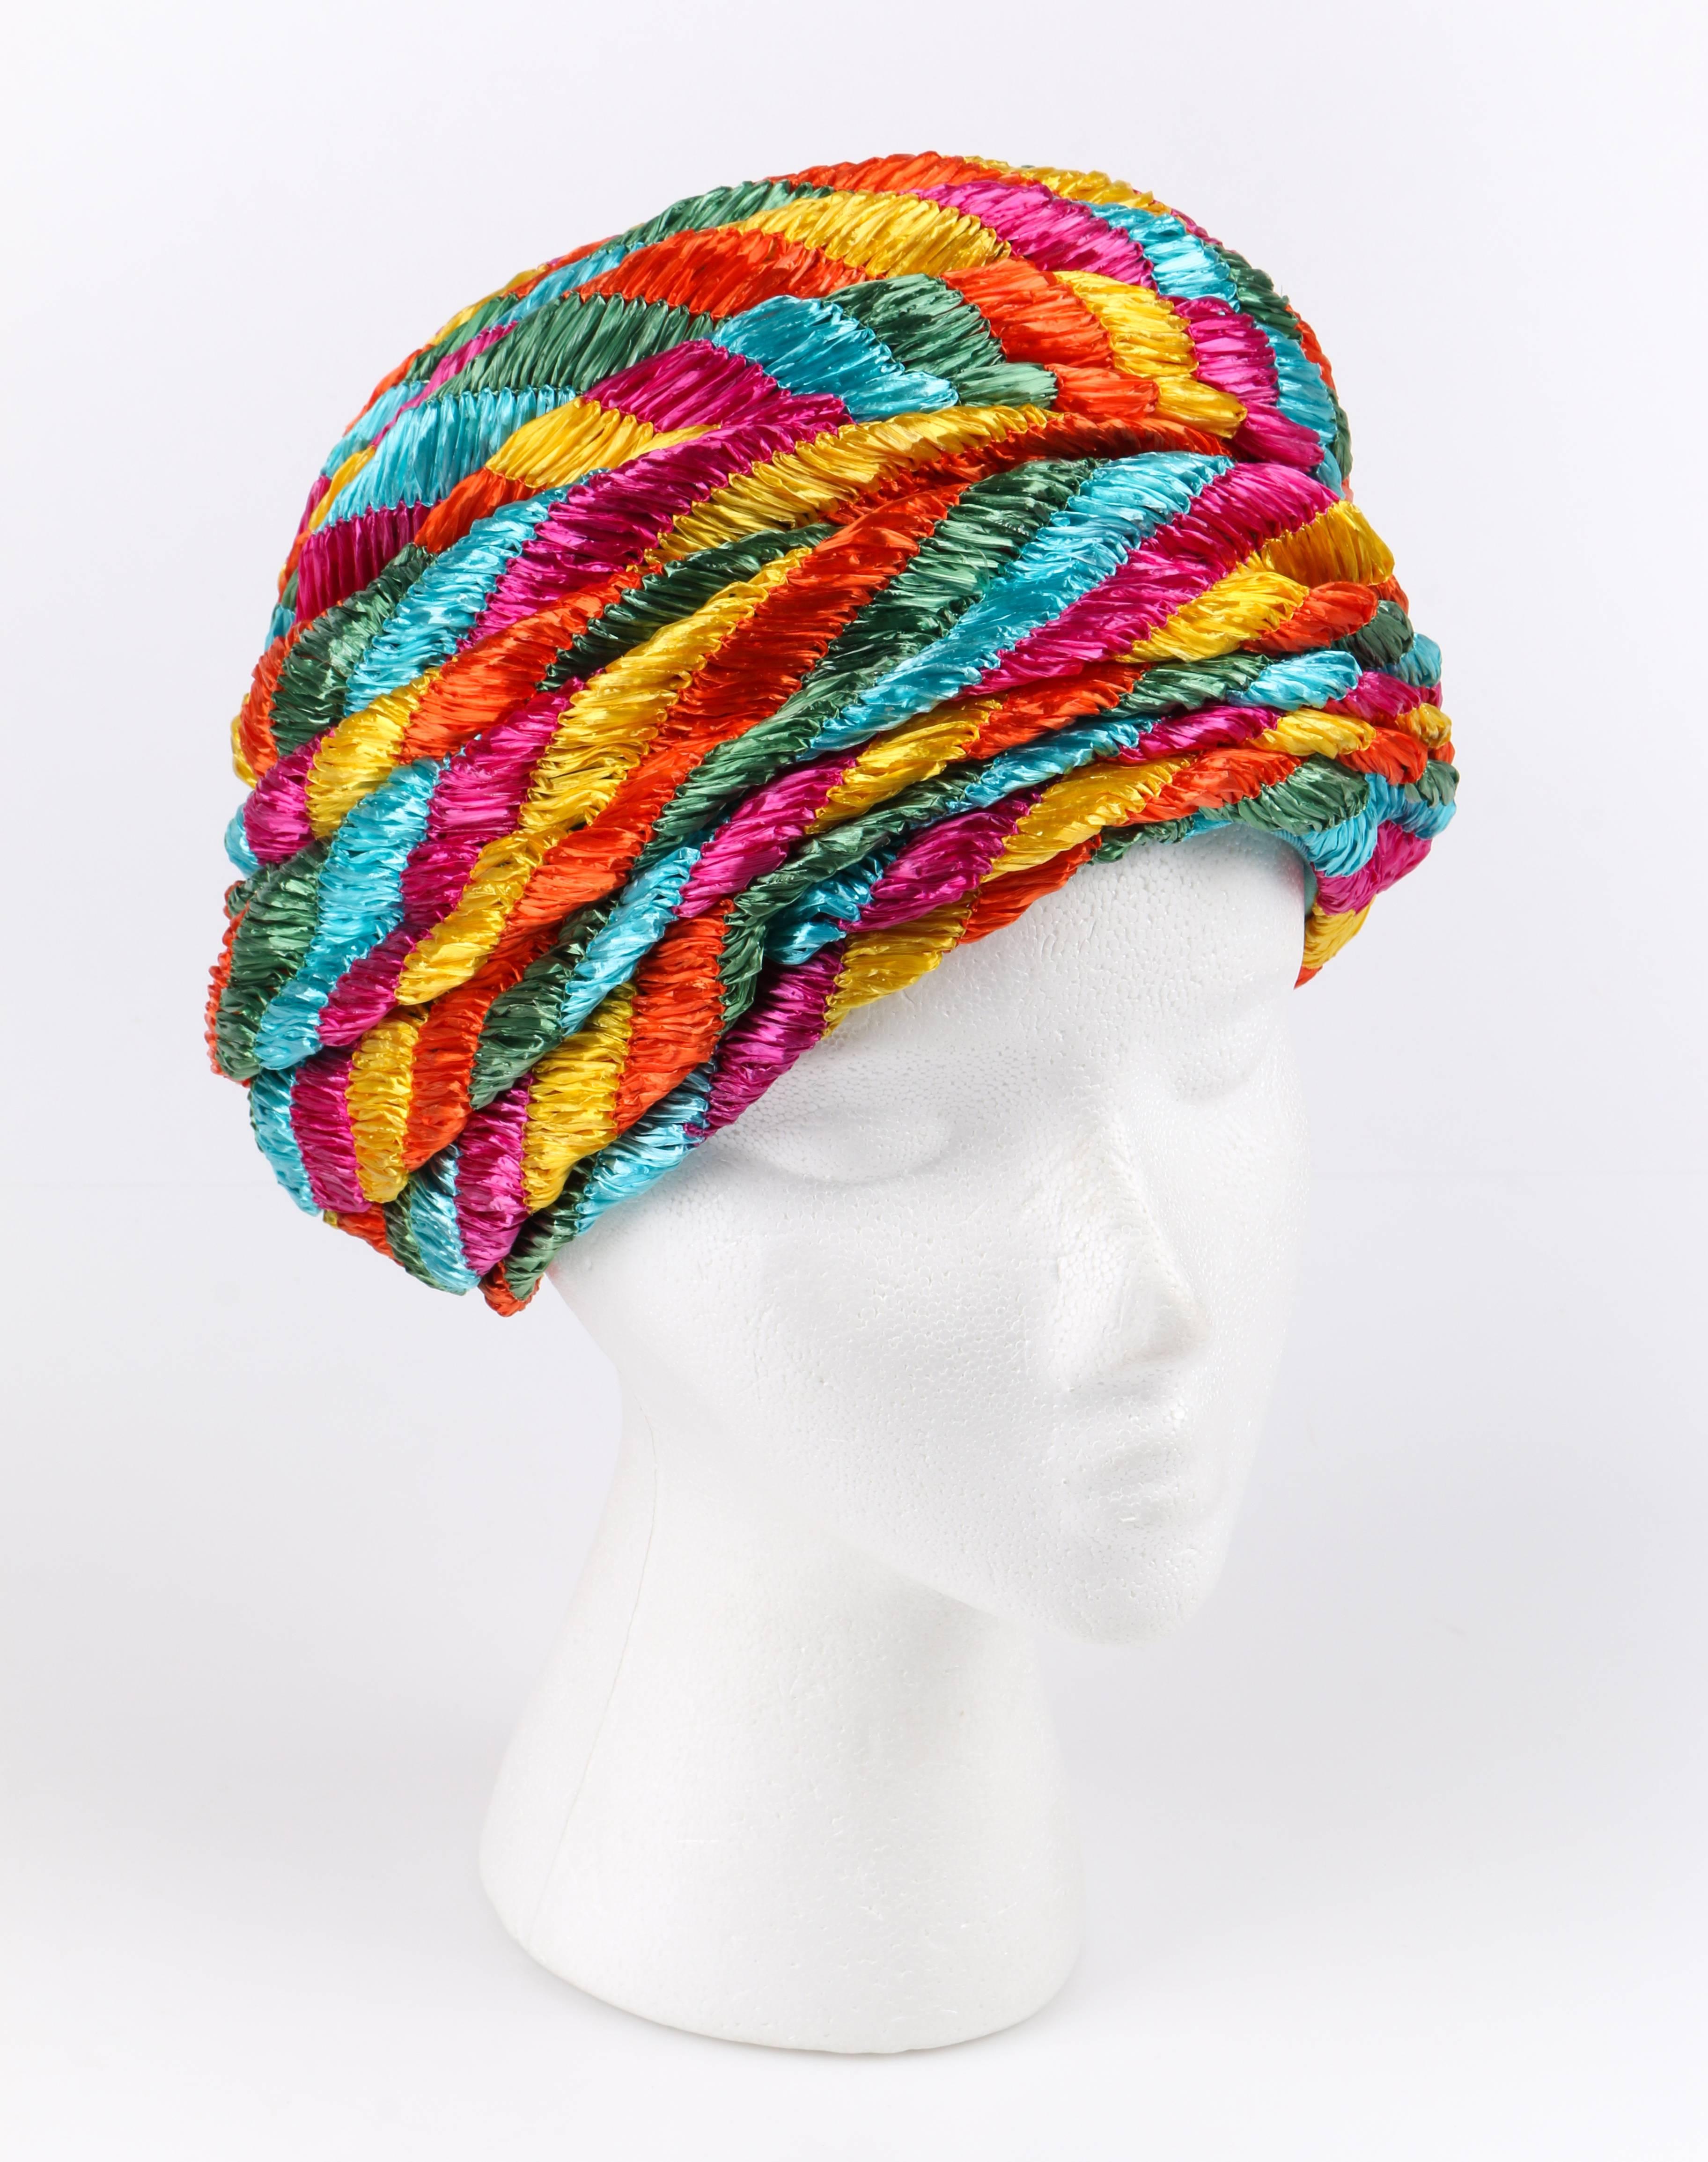 Vintage c.1960's Christian Dior glossy multicolor pleated straw turban hat. Pink, yellow, green, blue, and orange structured gathered pleat straw body. Straw wraps around head for beehive appearance. Aqua blue faille silk lined. Unmarked Fabric